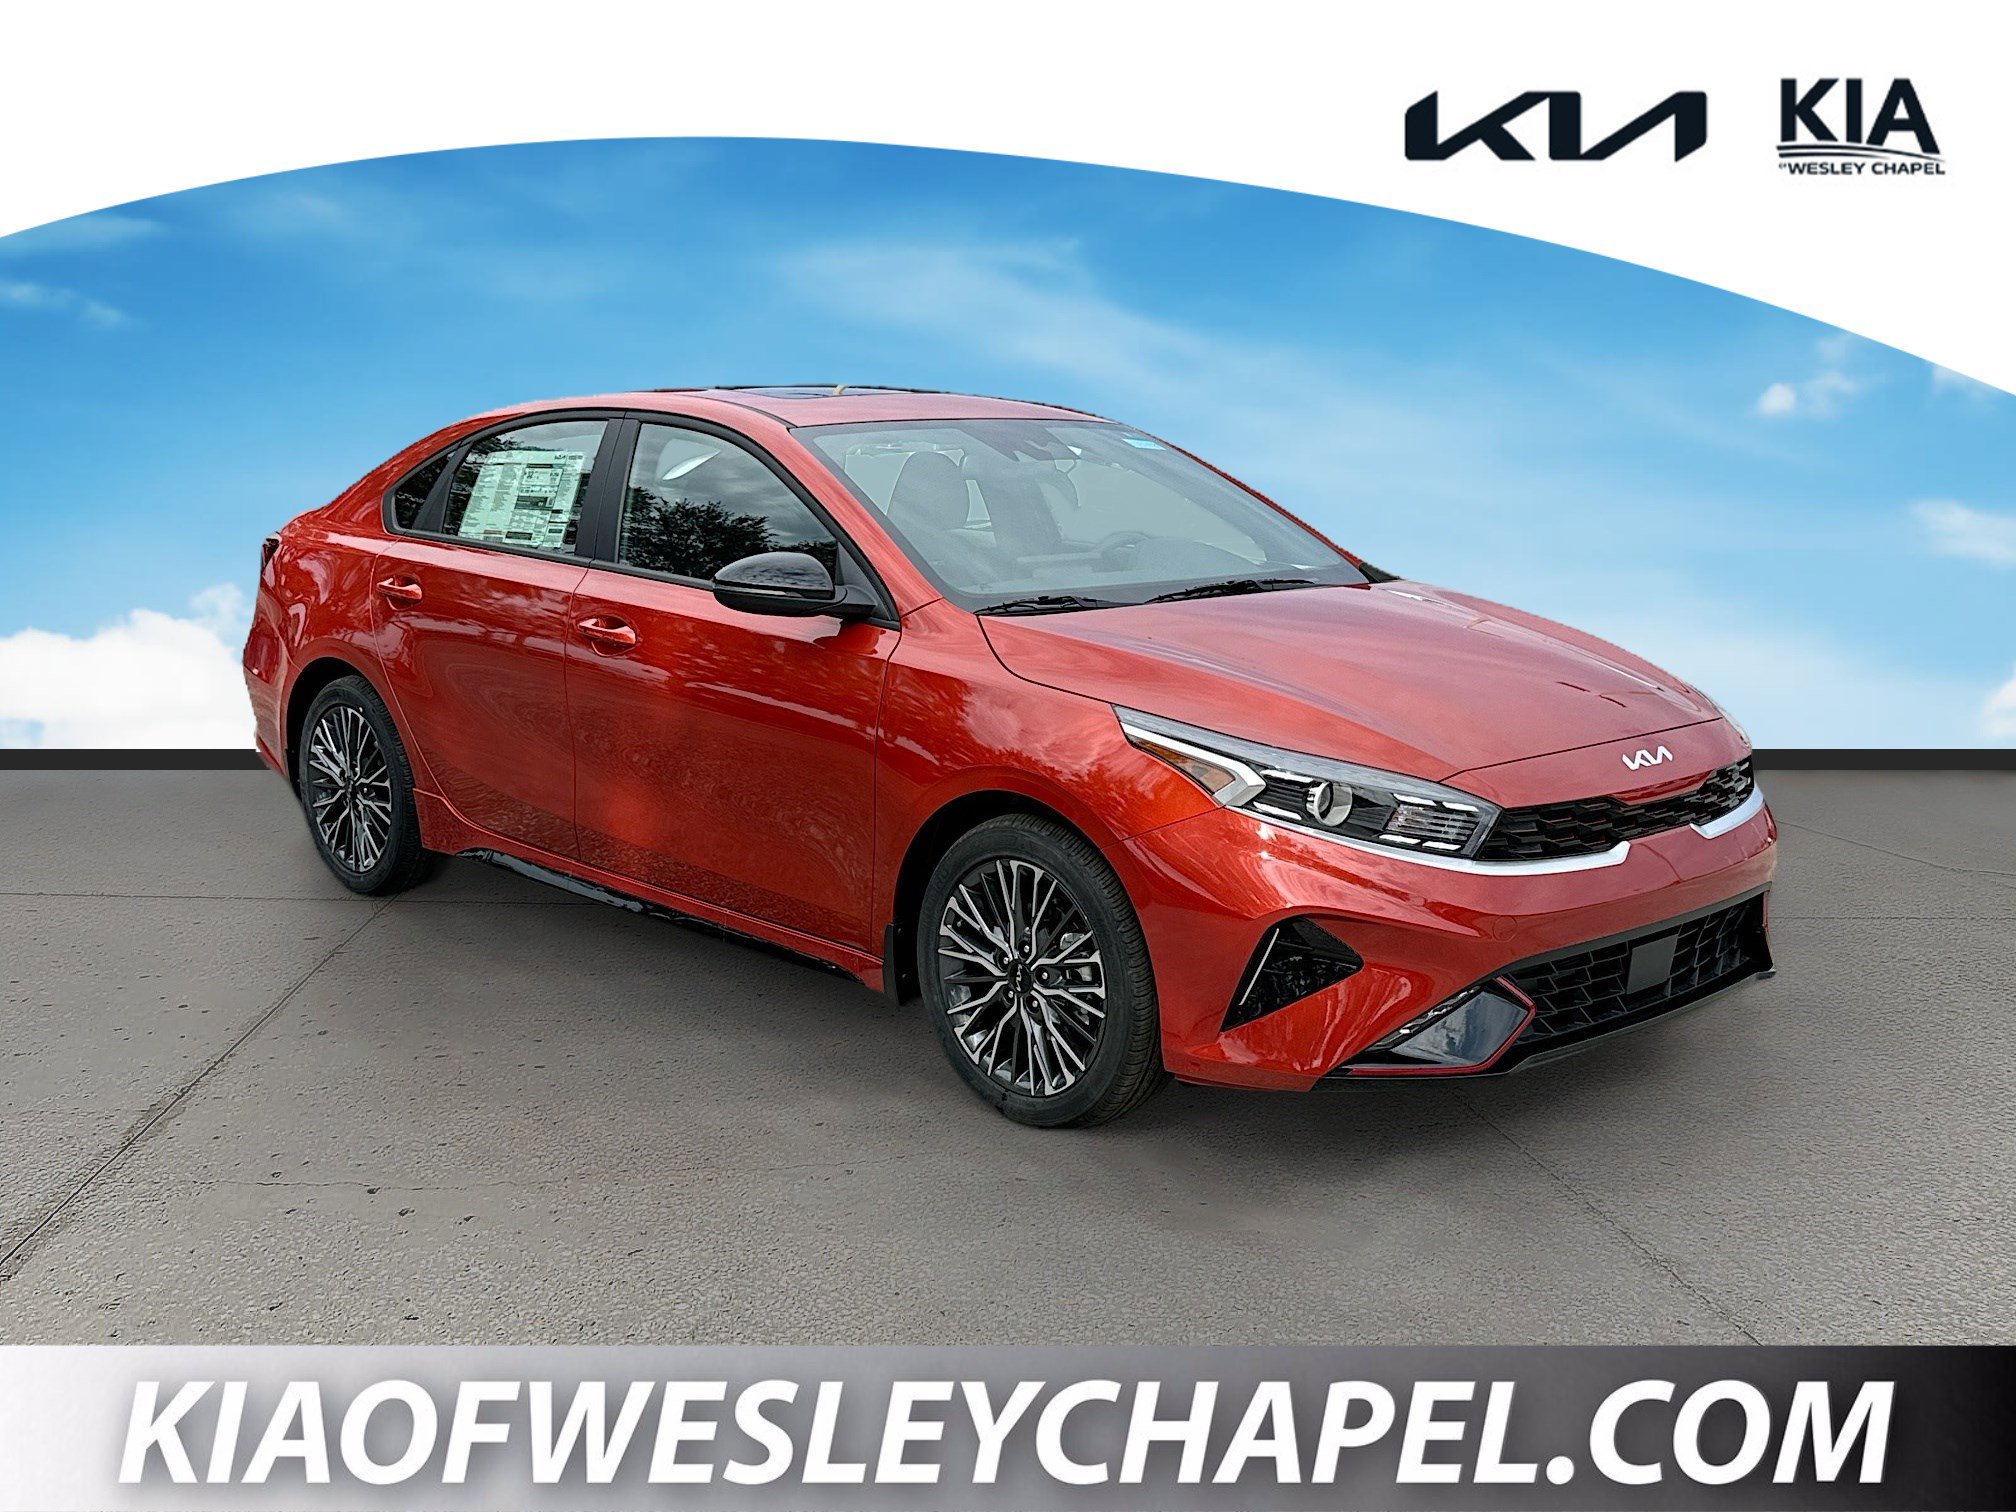 Upgrade your Kia Forte GT with a sleek front bumper.